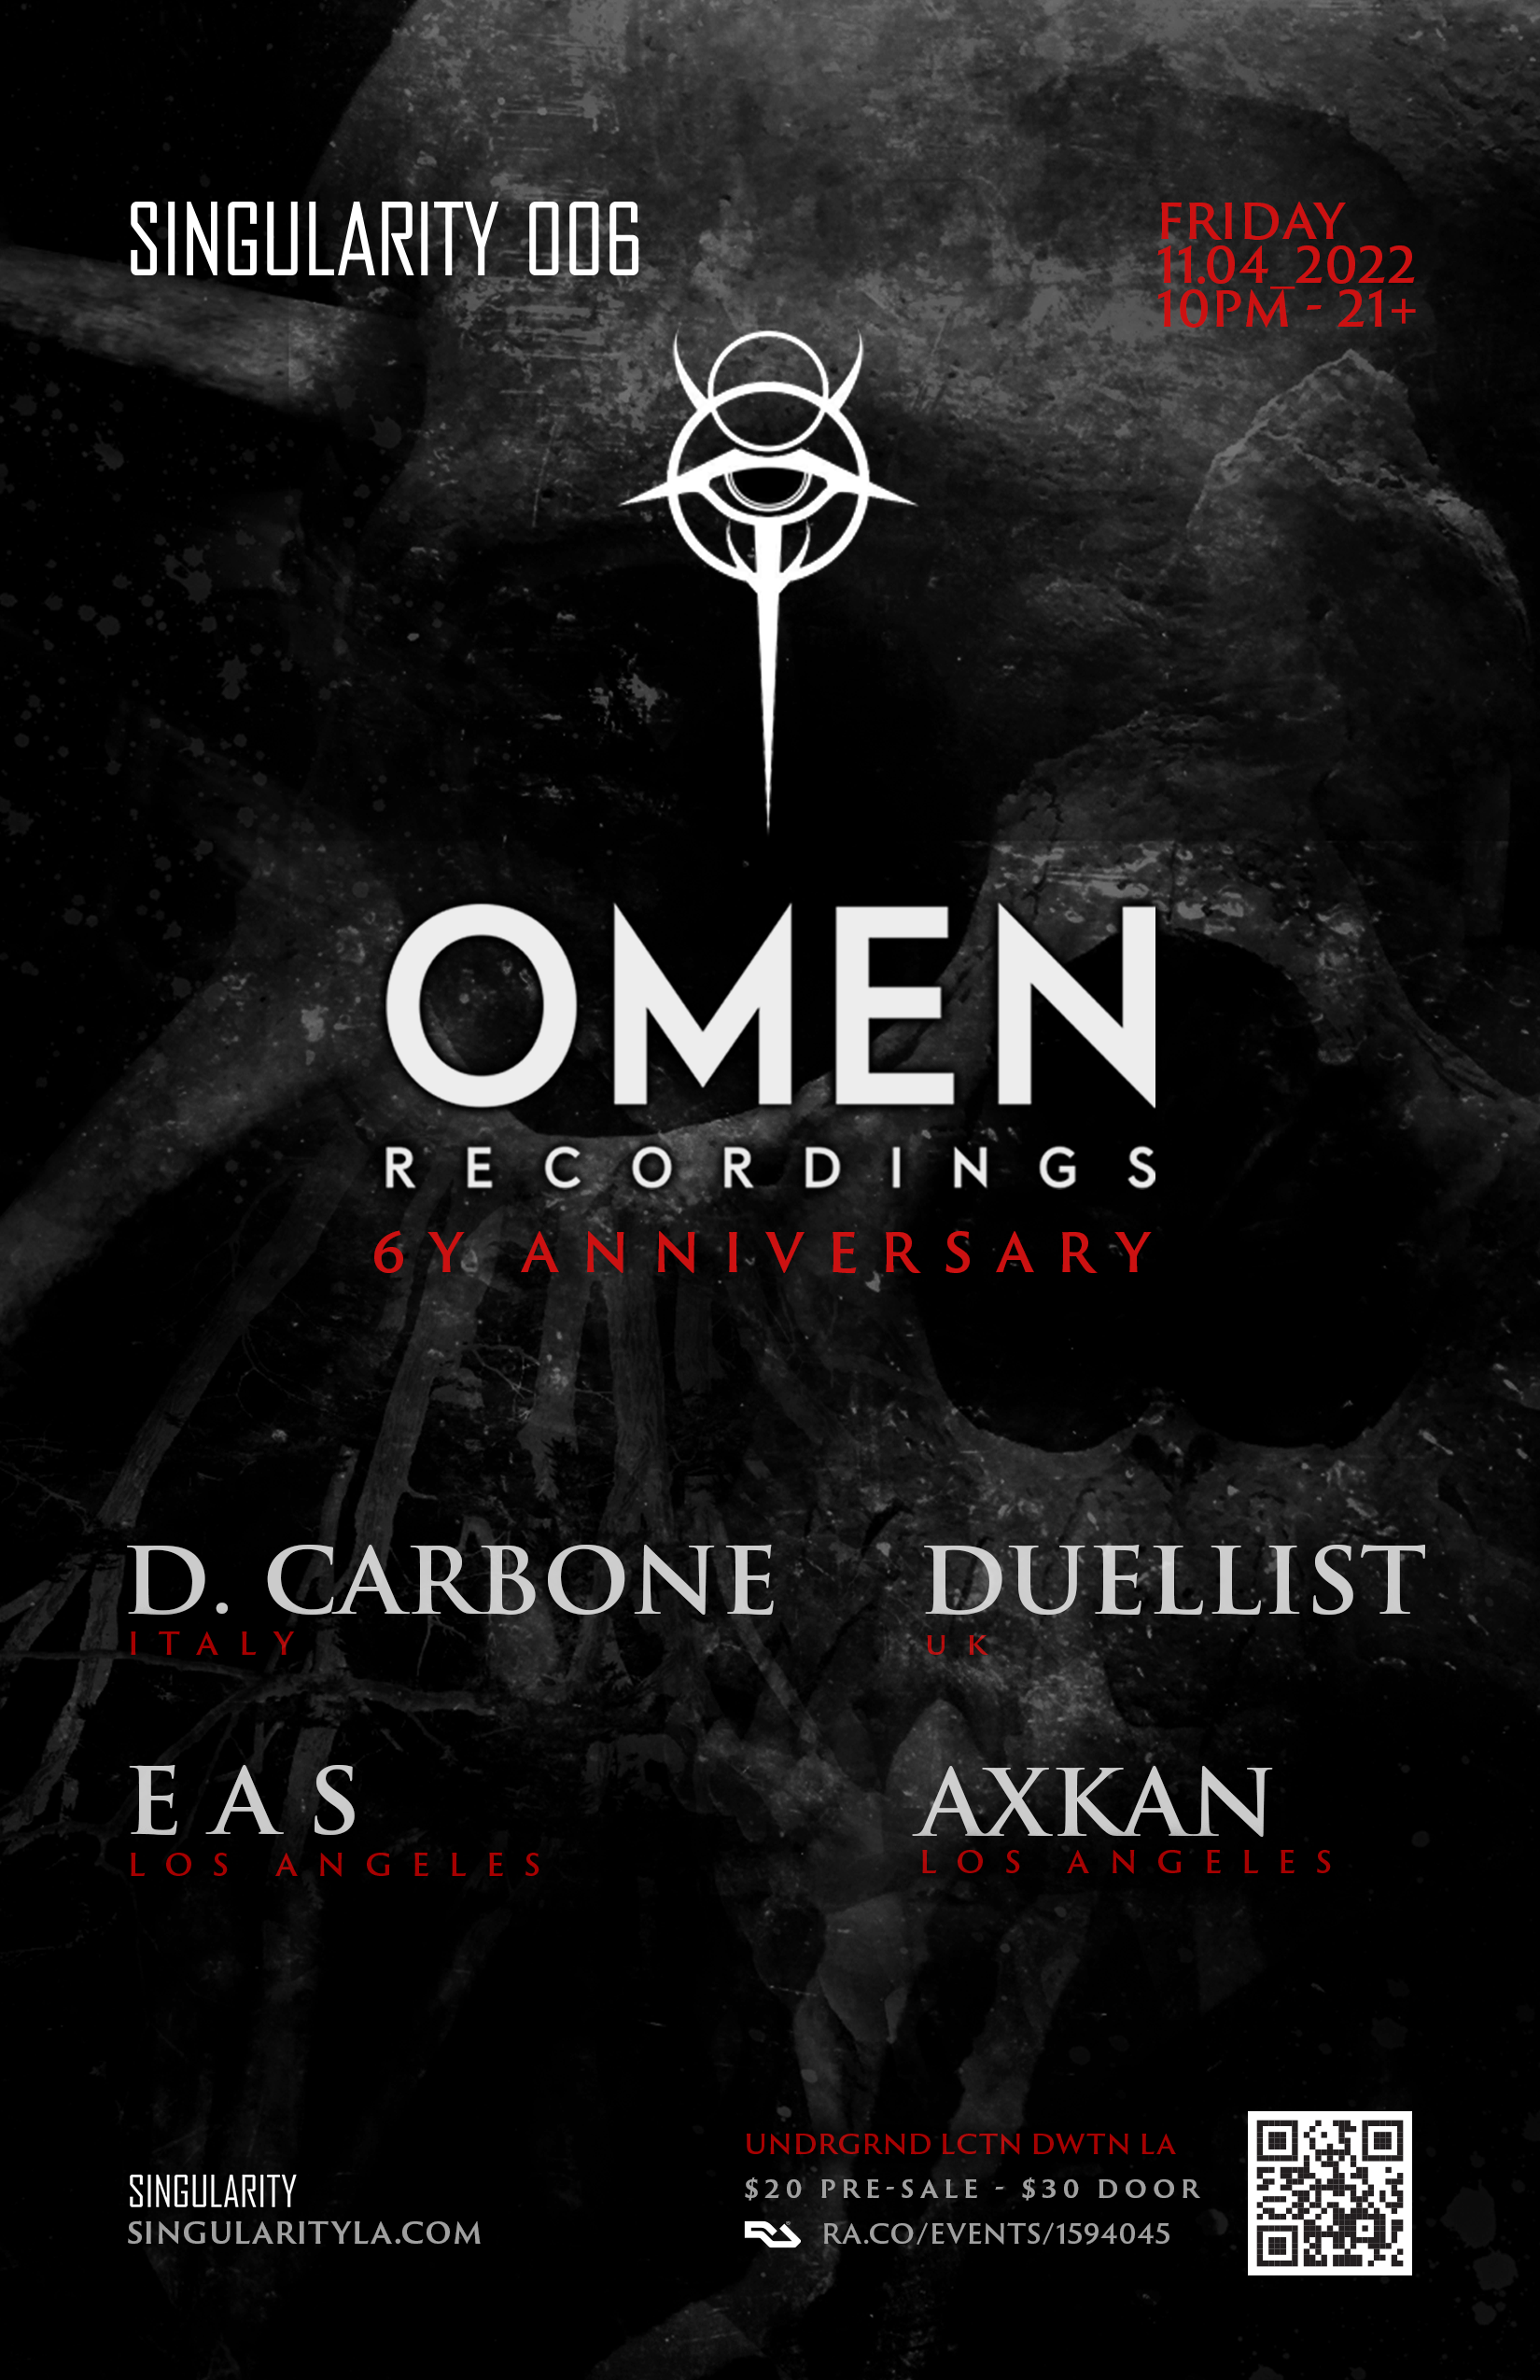 OMEN 6 Years - Singularity 006 with D. Carbone, Duellist, EAS, Axkan - フライヤー表